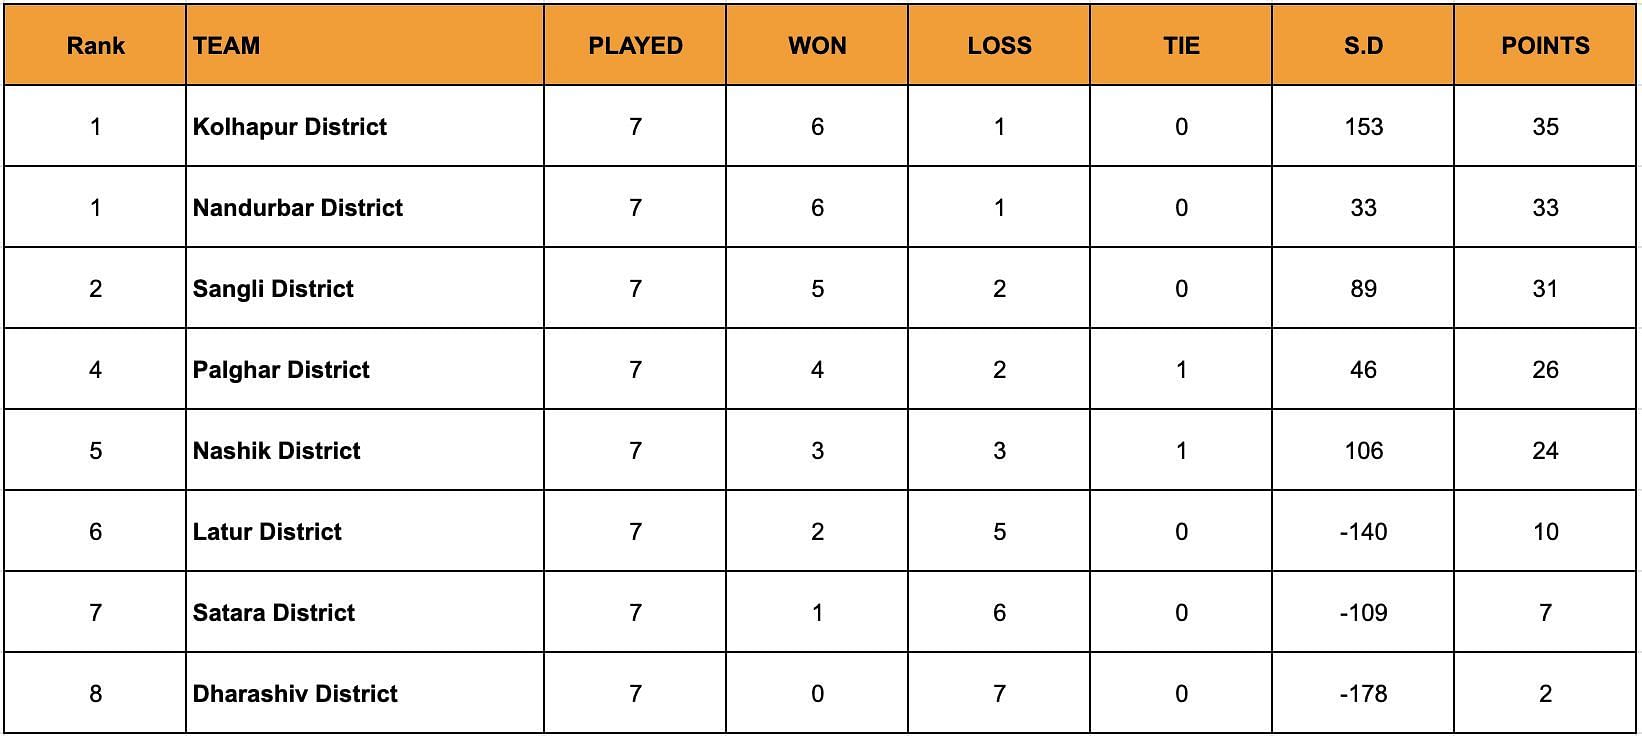 A look at the standings after the conclusion of Day 14.